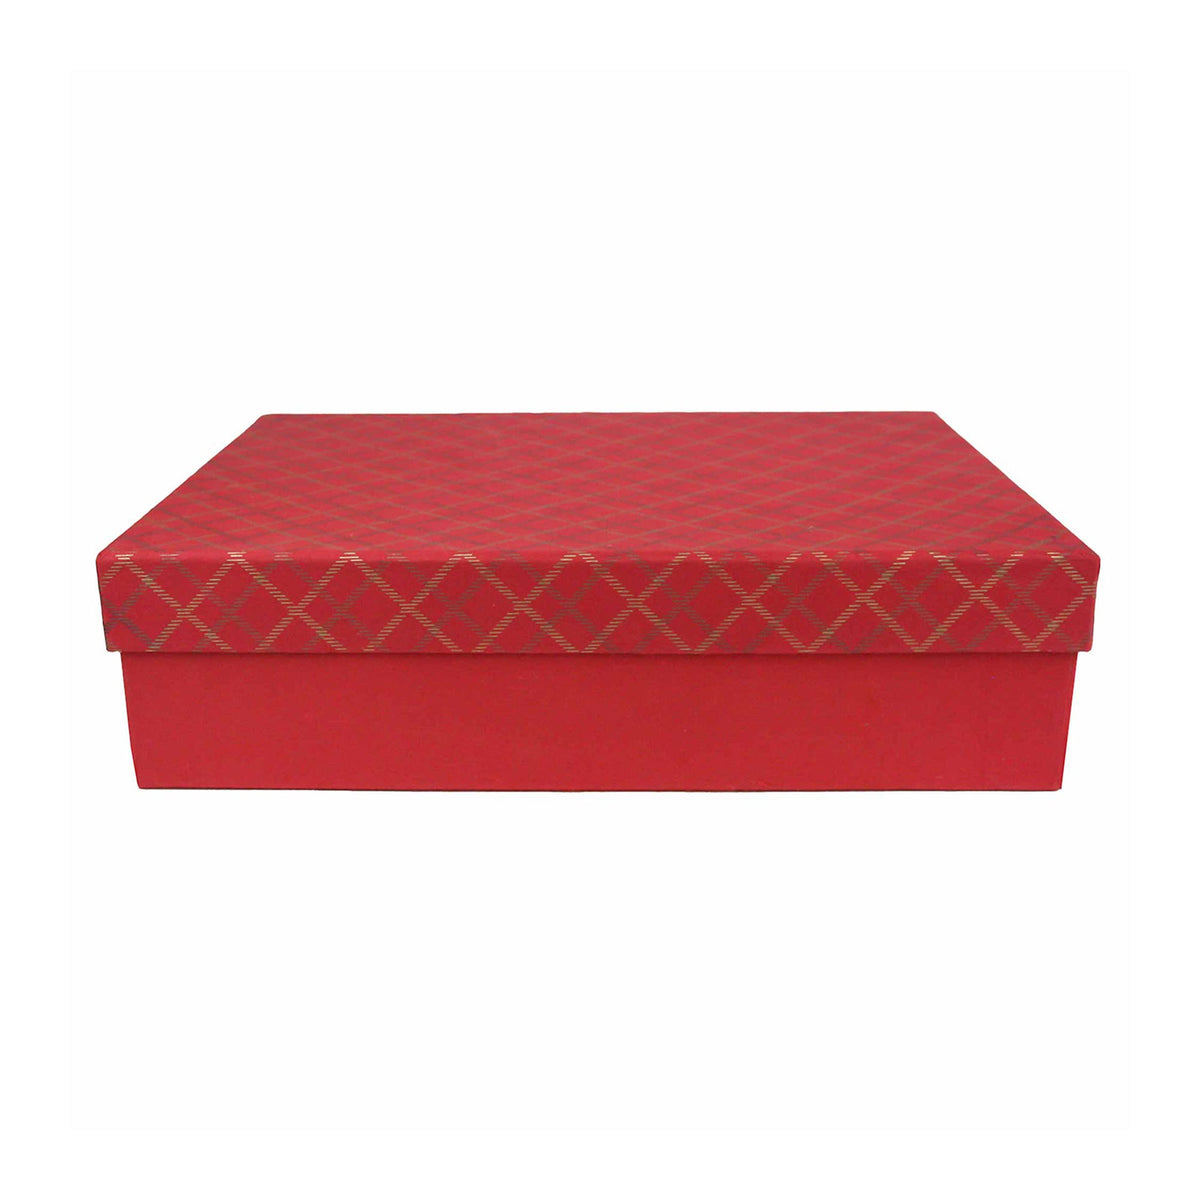 Single Handmade Red Chequered Gift Box (Sizes Available)